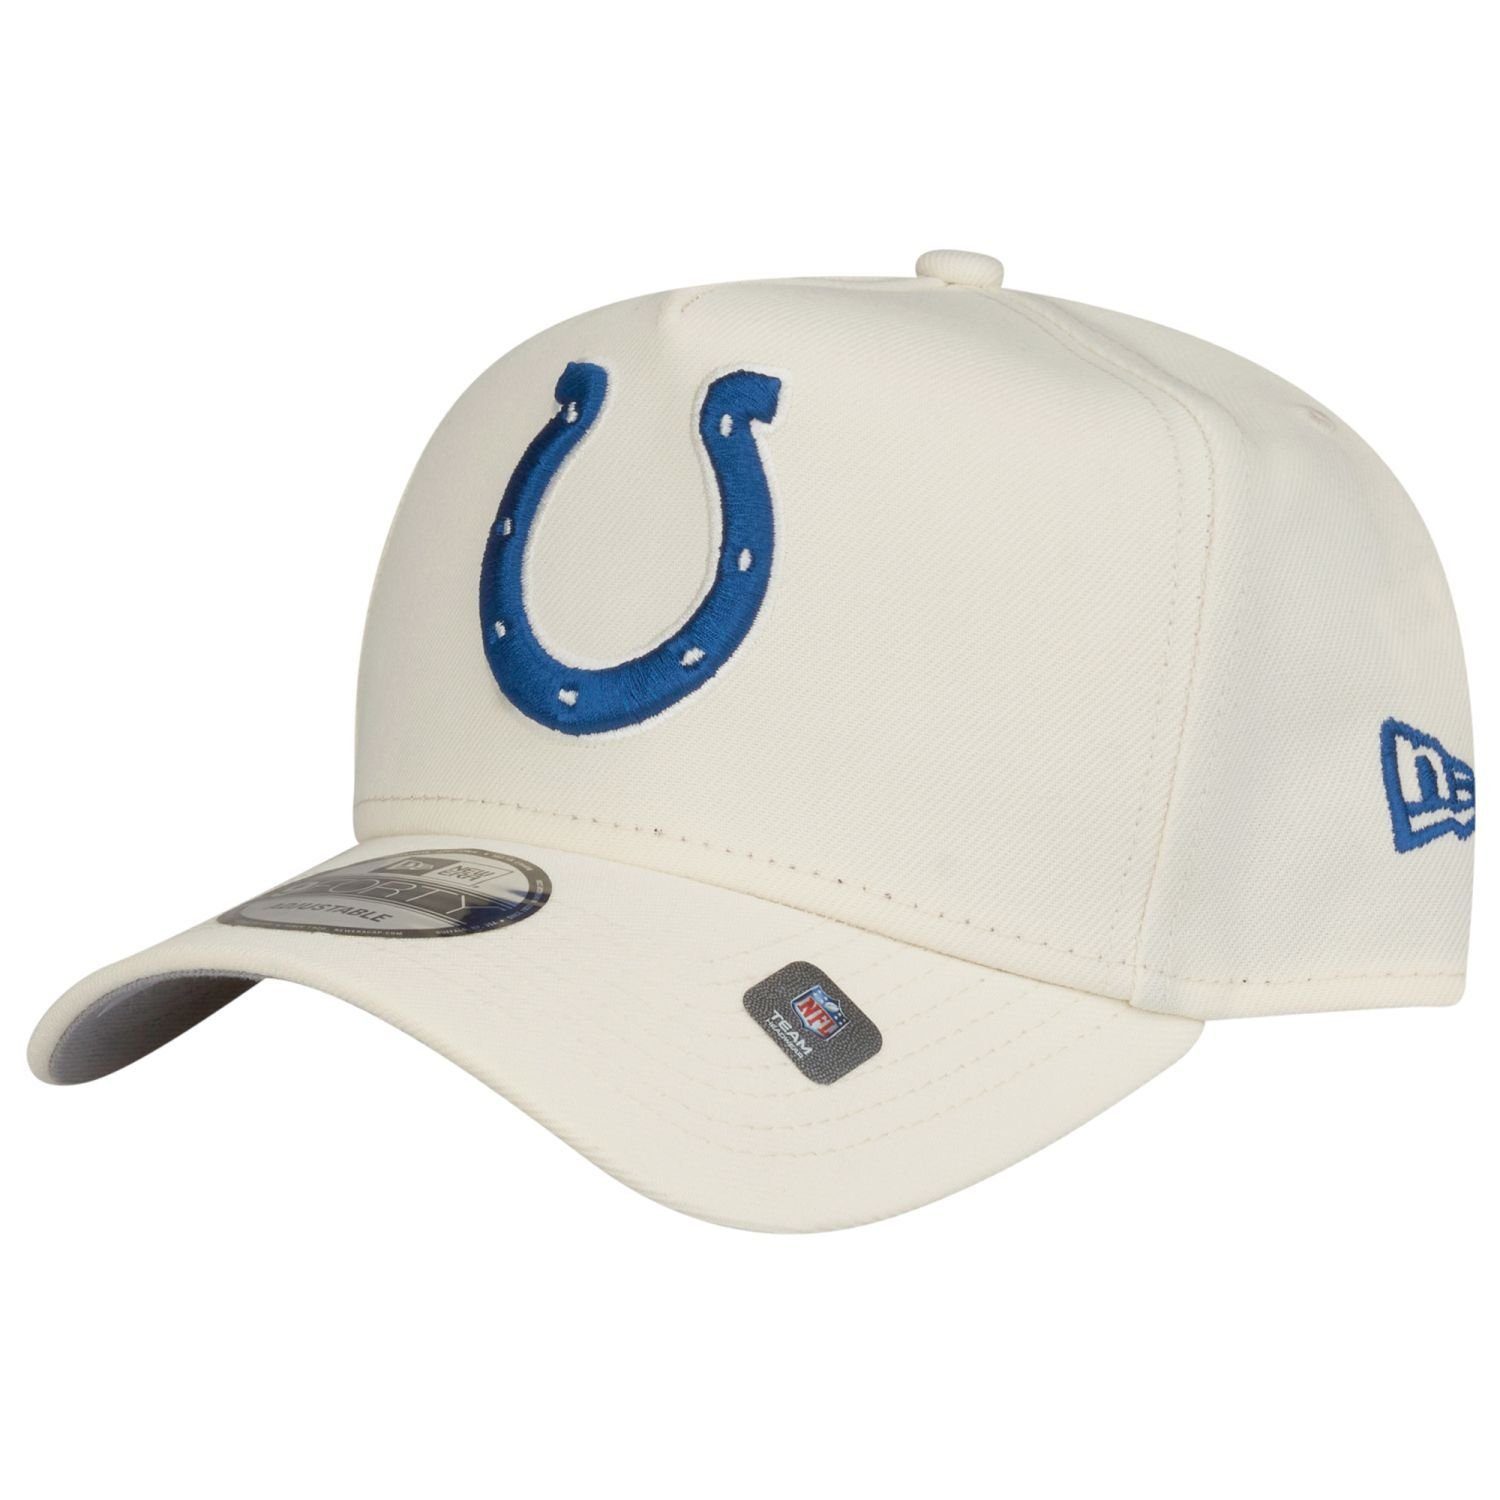 New Era Trucker Cap 9Forty AFrame Trucker NFL TEAMS chrome white Indianapolis Colts